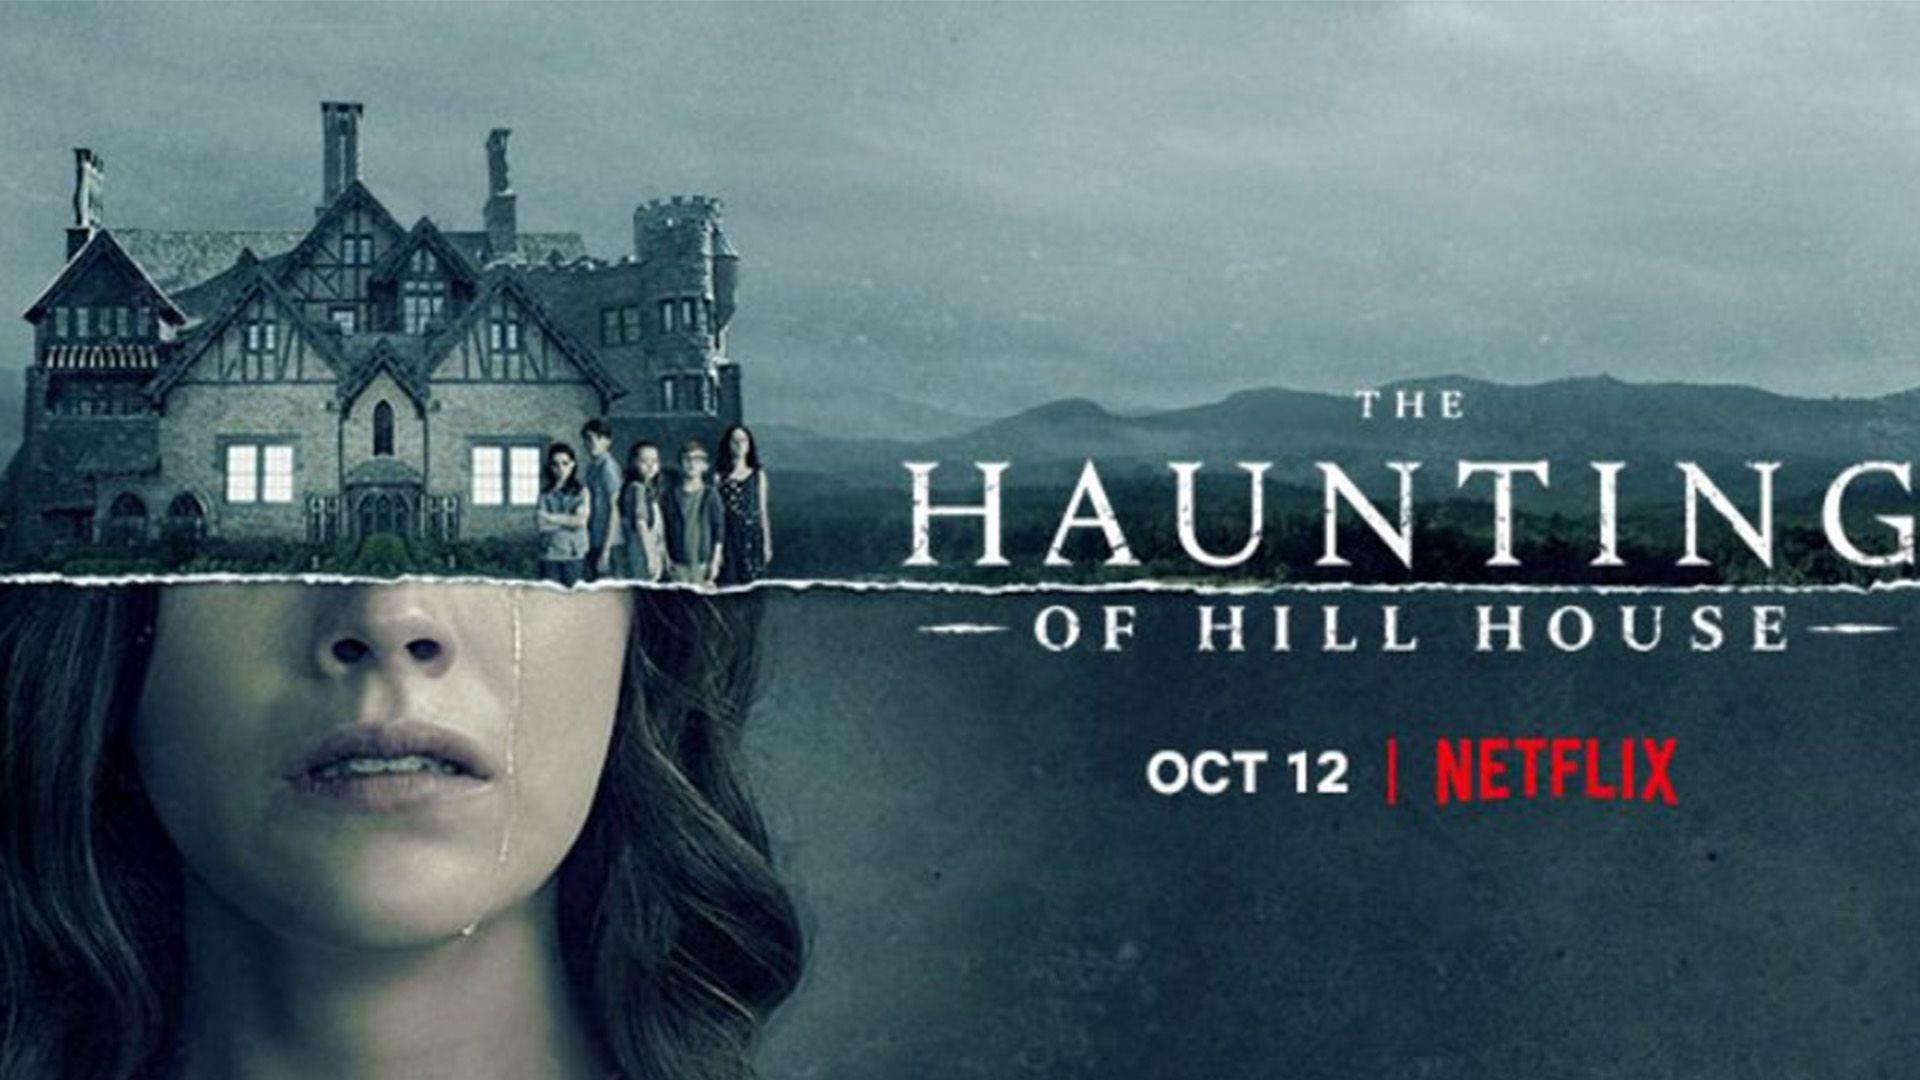 The Haunting of Hill House Filming Location Was A Real Haunted House